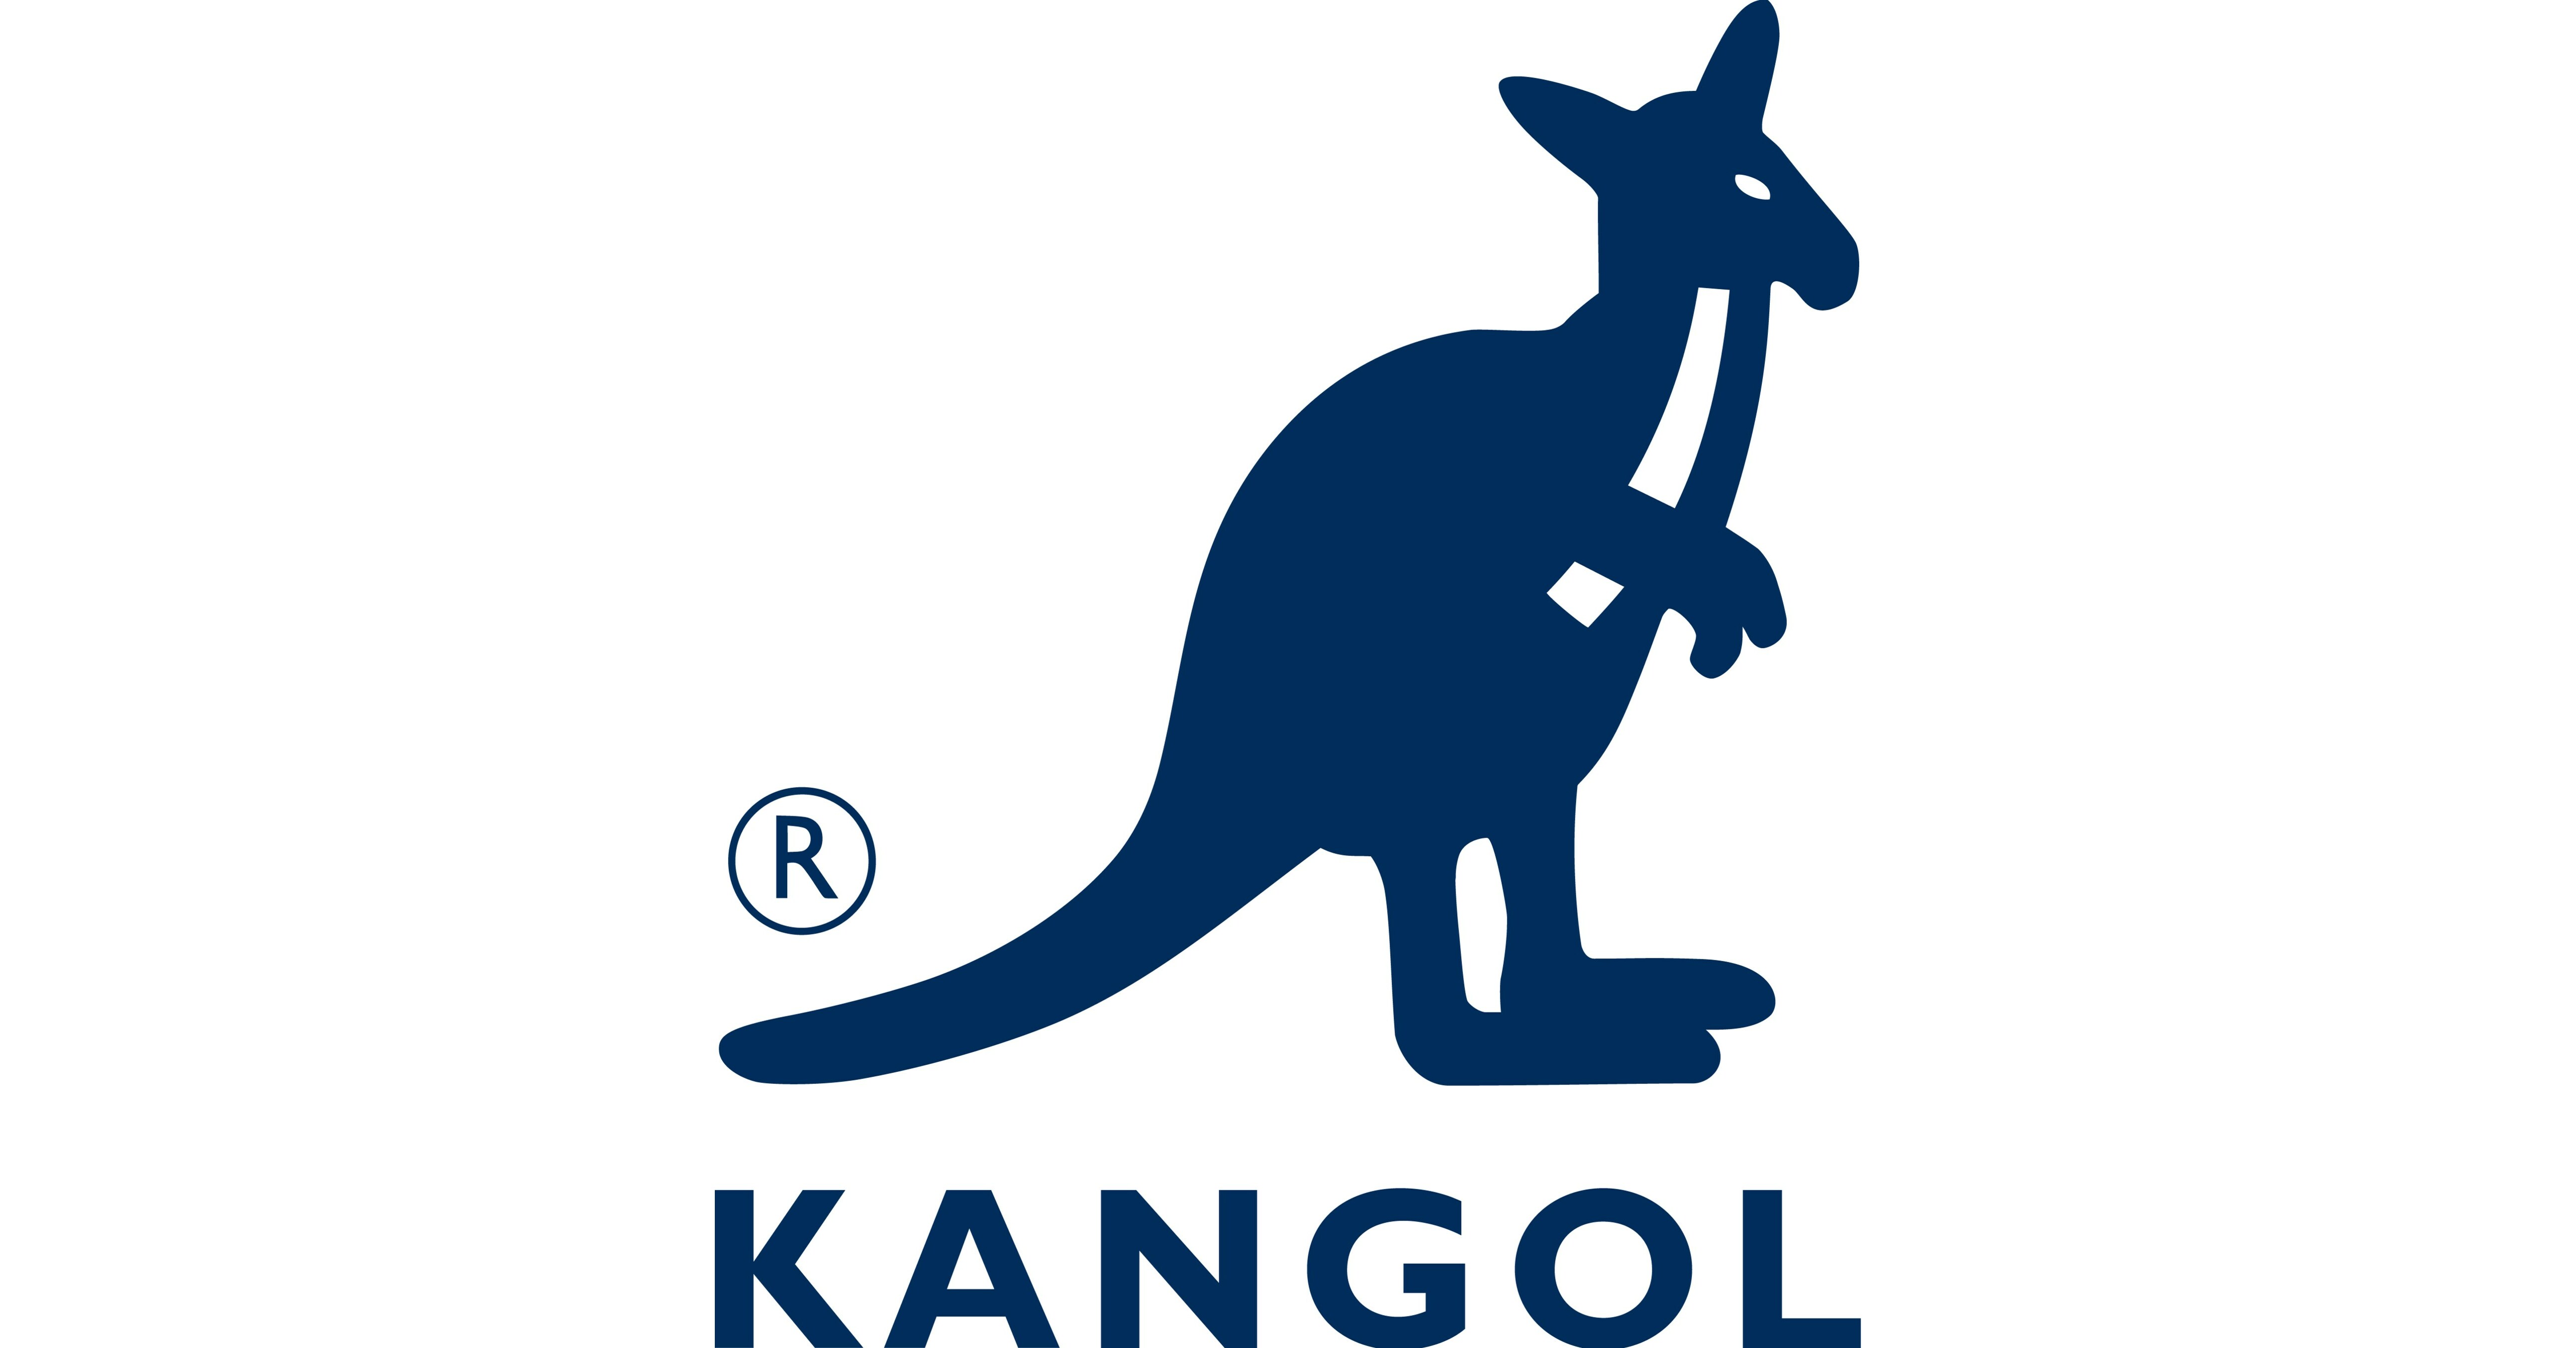 BOLLMAN HAT COMPANY SIGNS DEAL WITH FRASERS GROUP TO ACQUIRE KANGOL BRAND